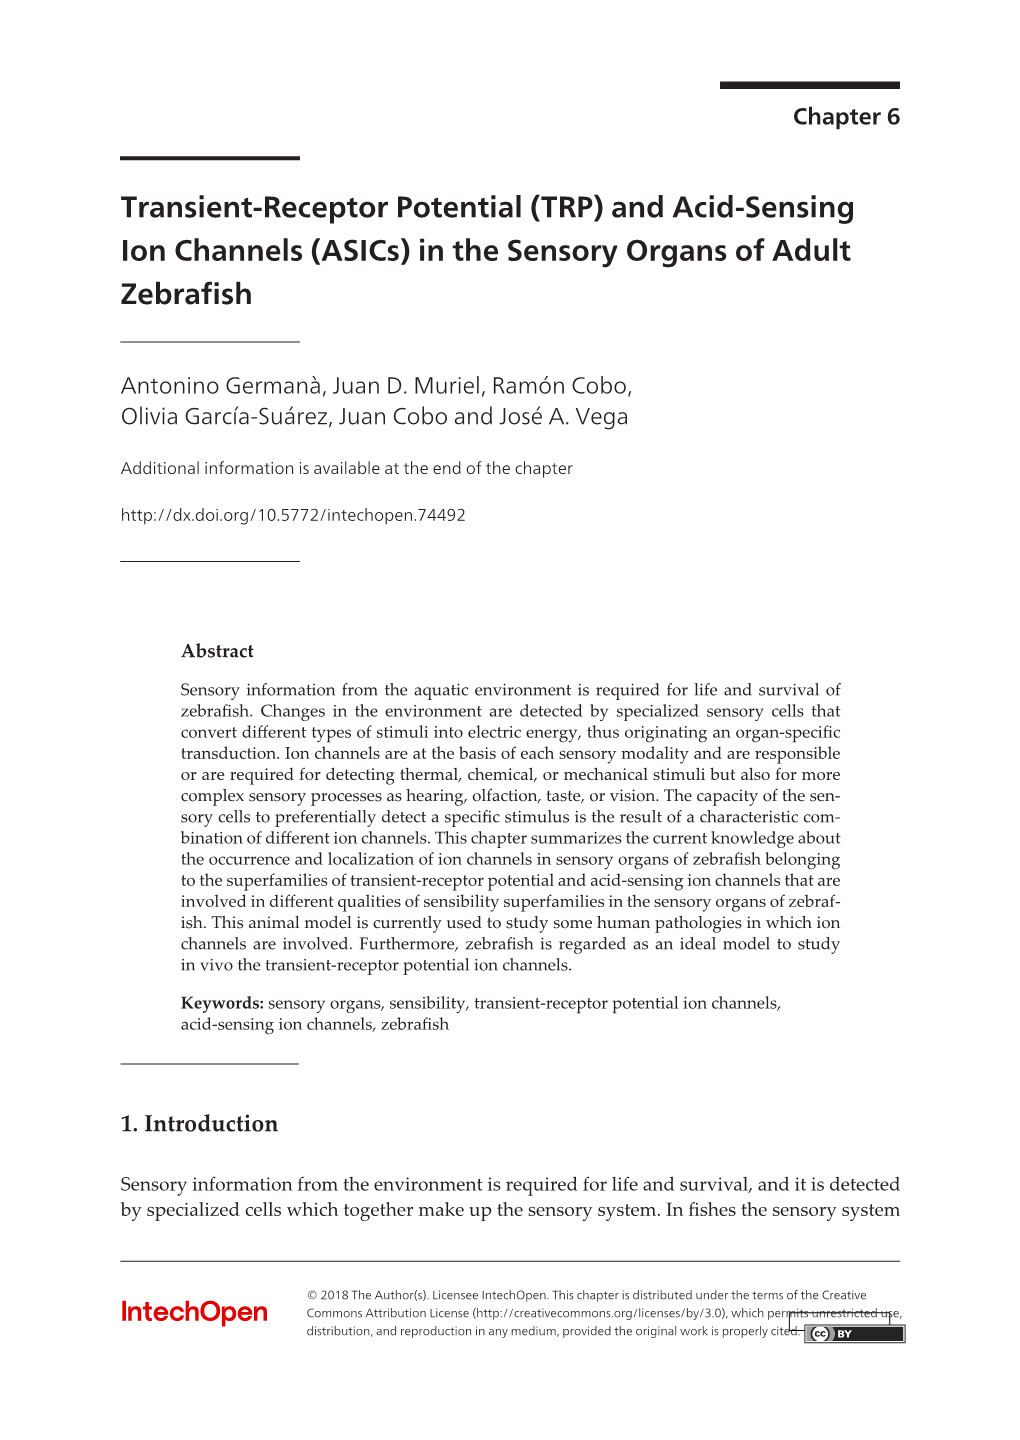 (TRP) and Acid-Sensing Ion Channels (Asics) in the Sensory Organs of Adult Zebrafish